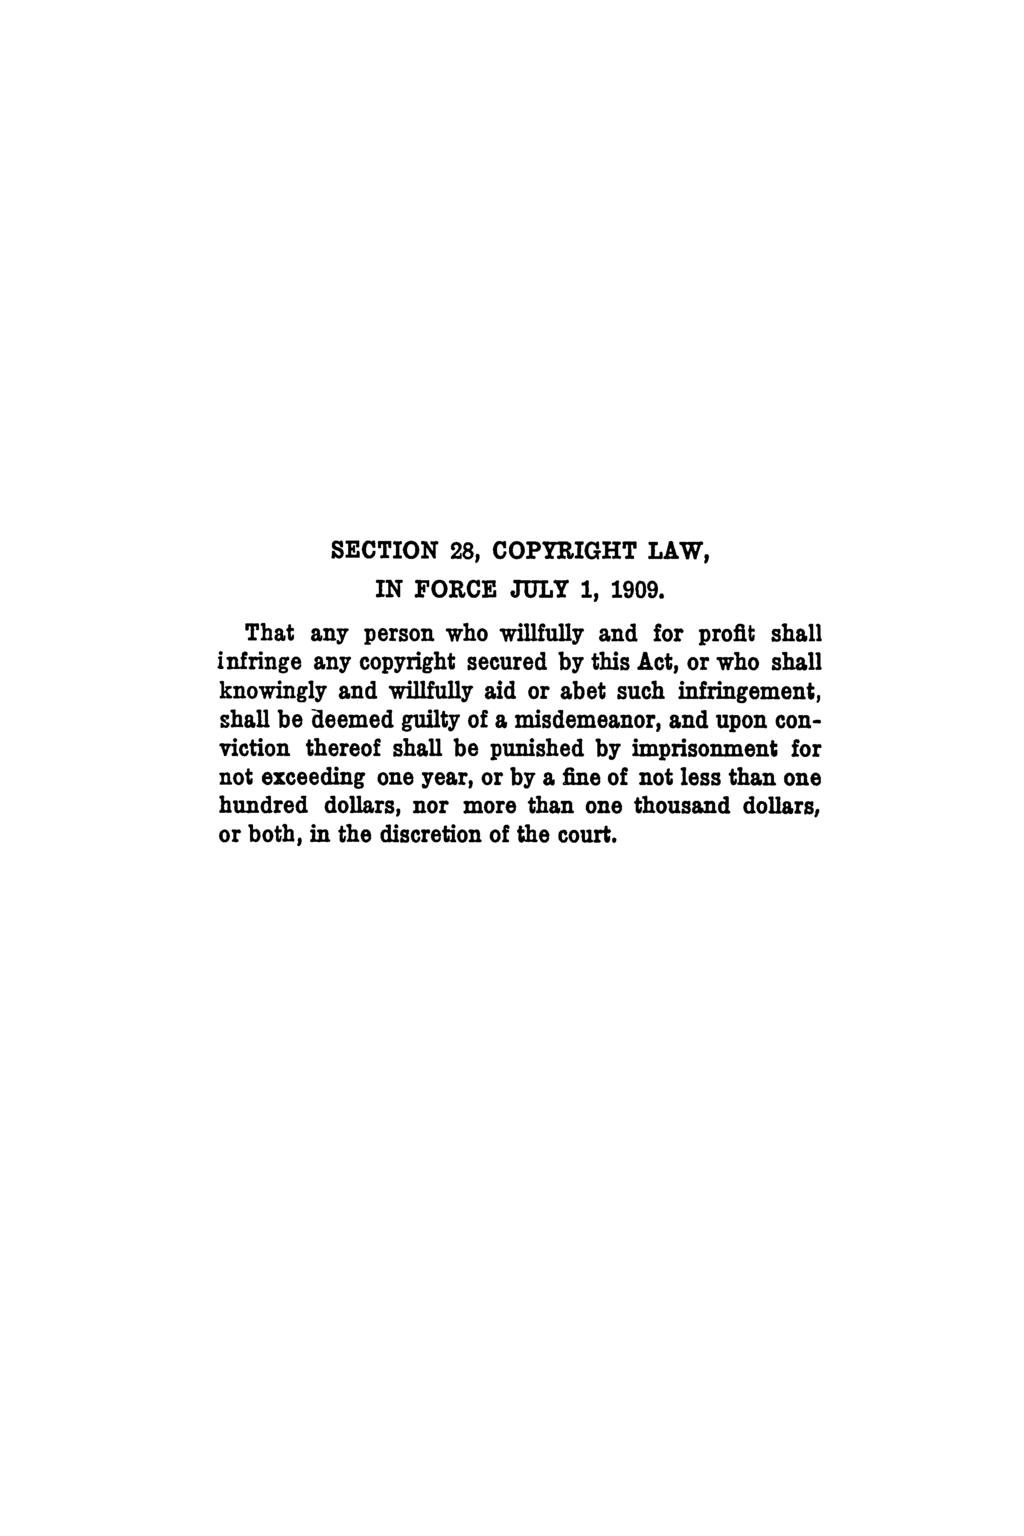 SECTION 28, COPYRIGHT LAW, IN FORCE JULY 1, 1909.